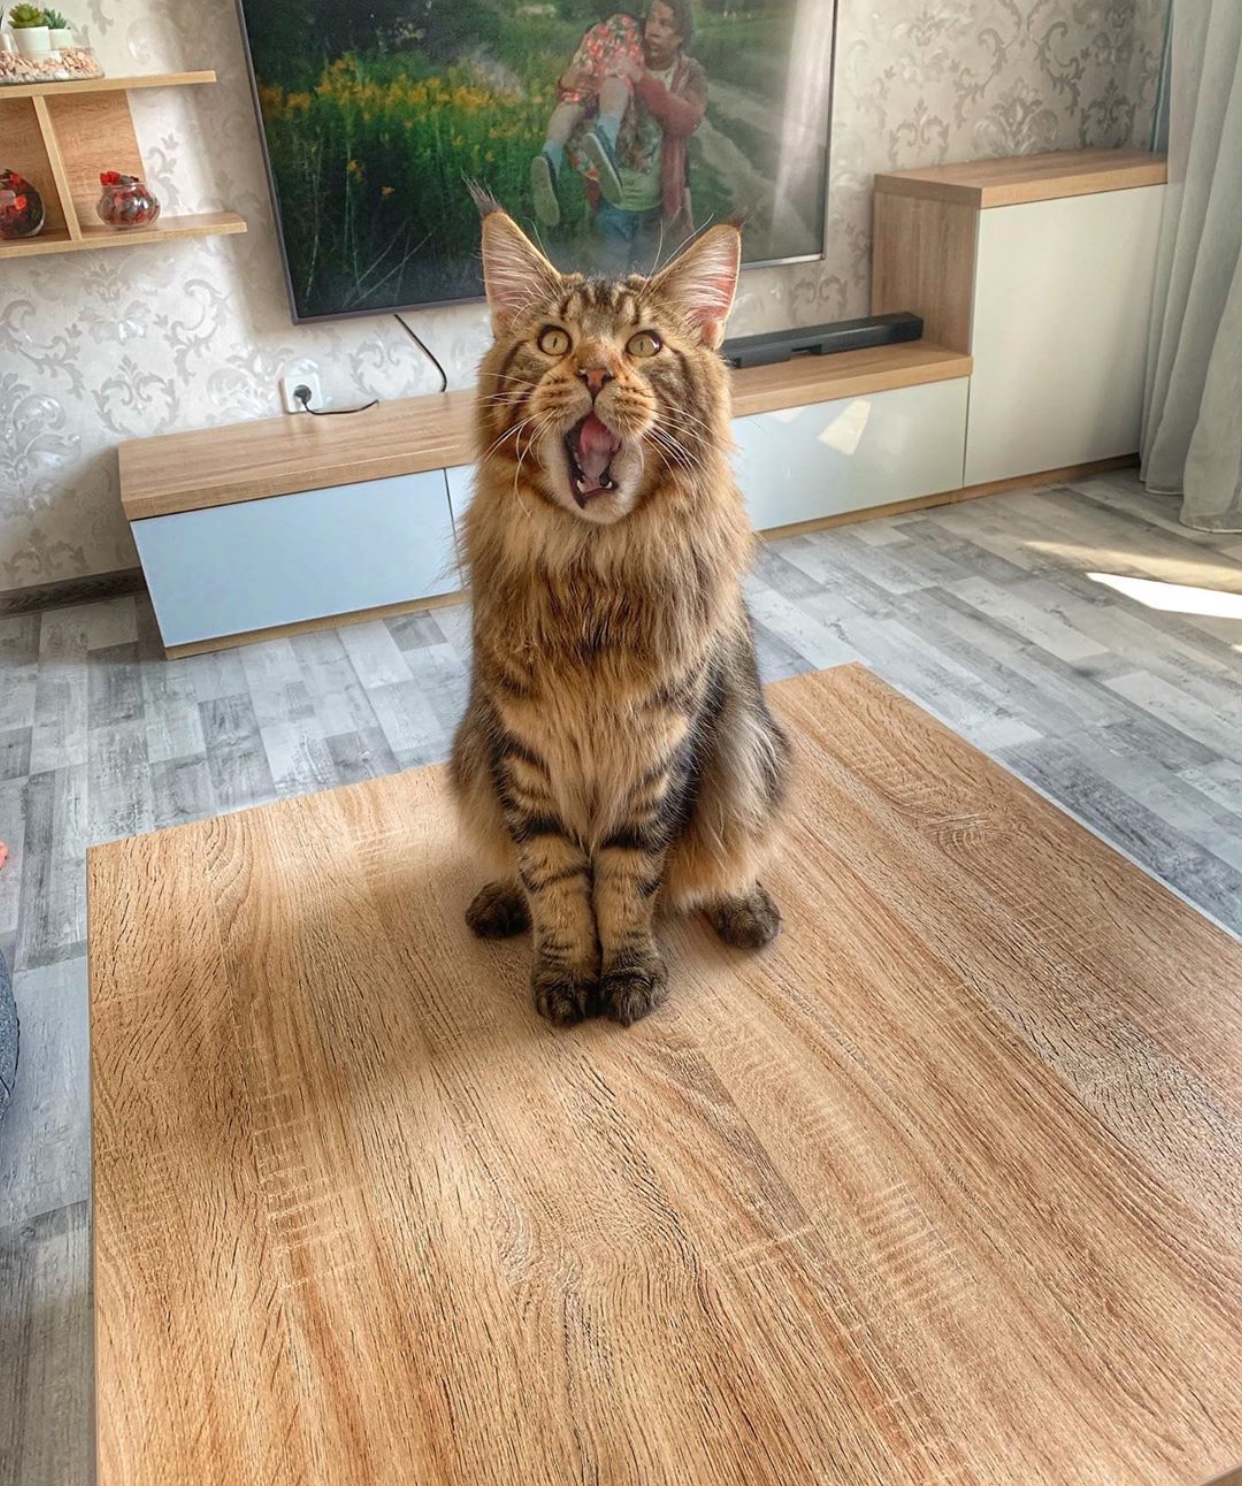 Maine Coon Cat sitting on top of the wooden table while meowing